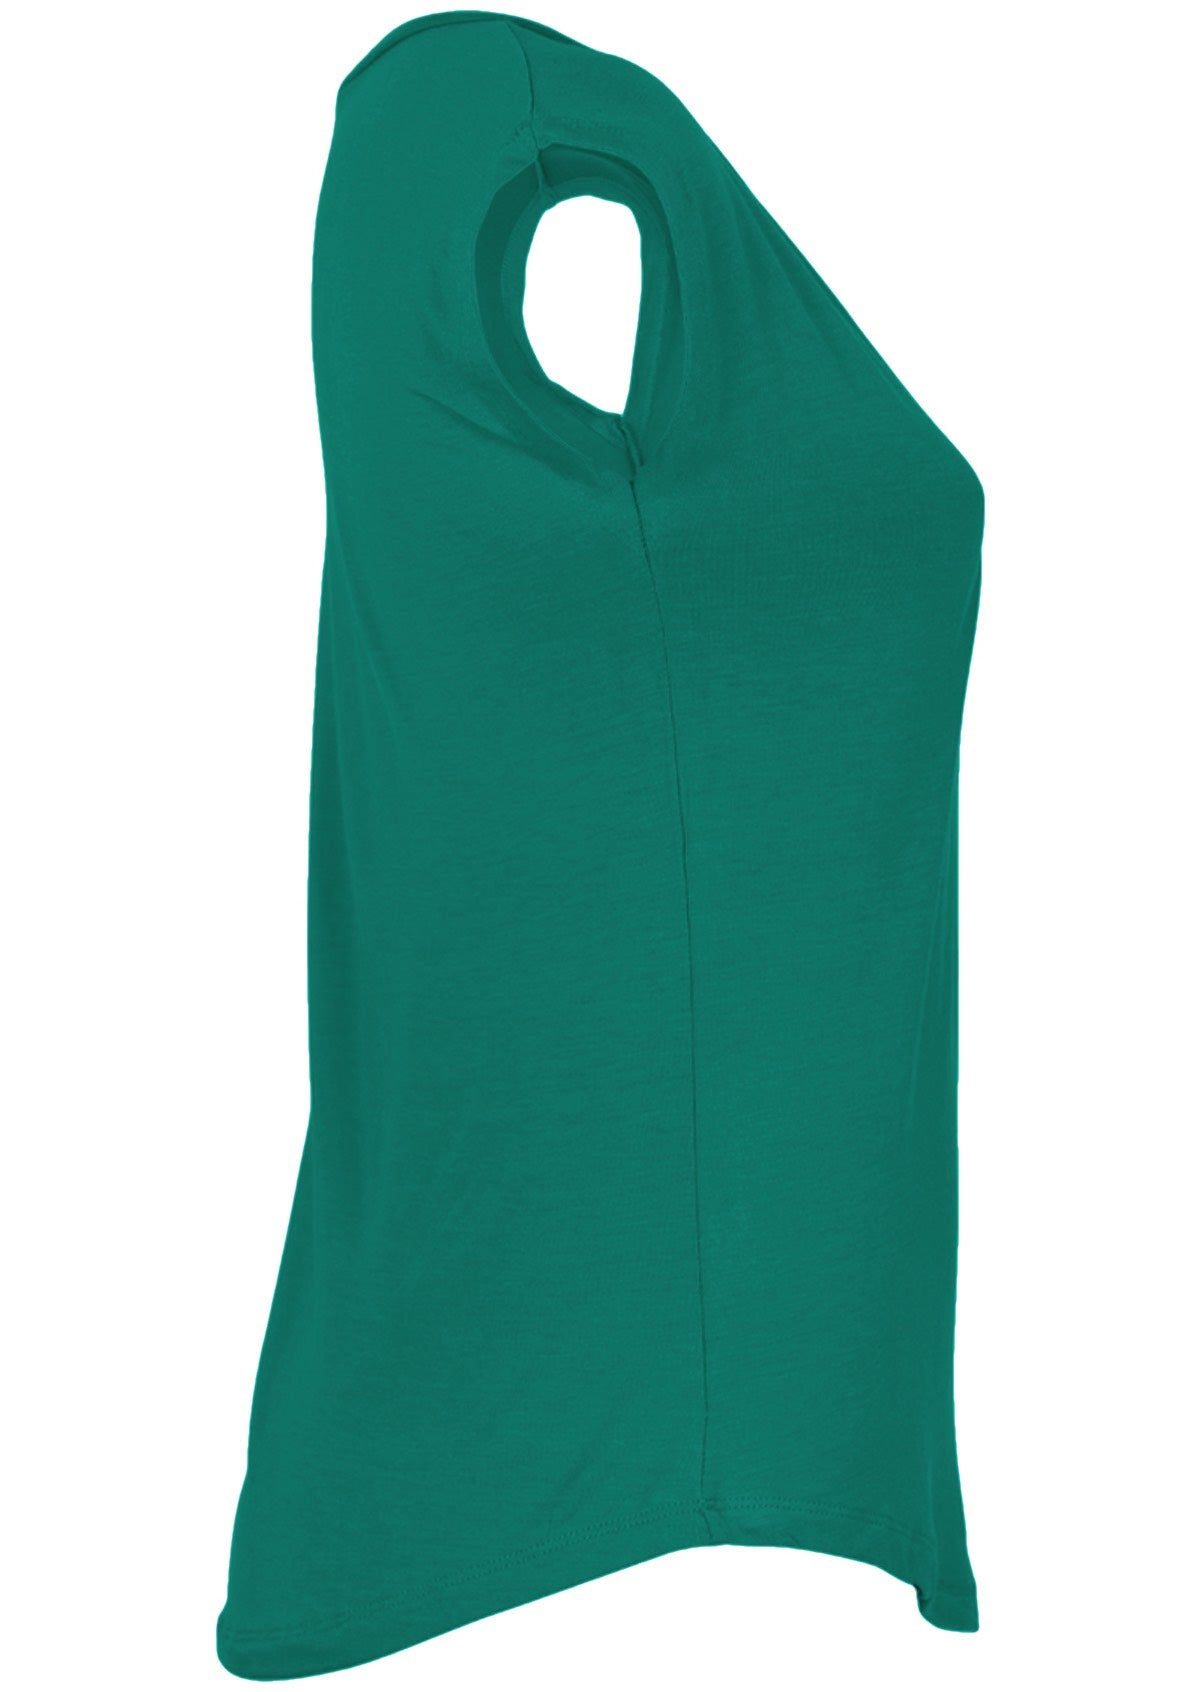 Side view of a women's green v-neck short cap sleeve rayon top